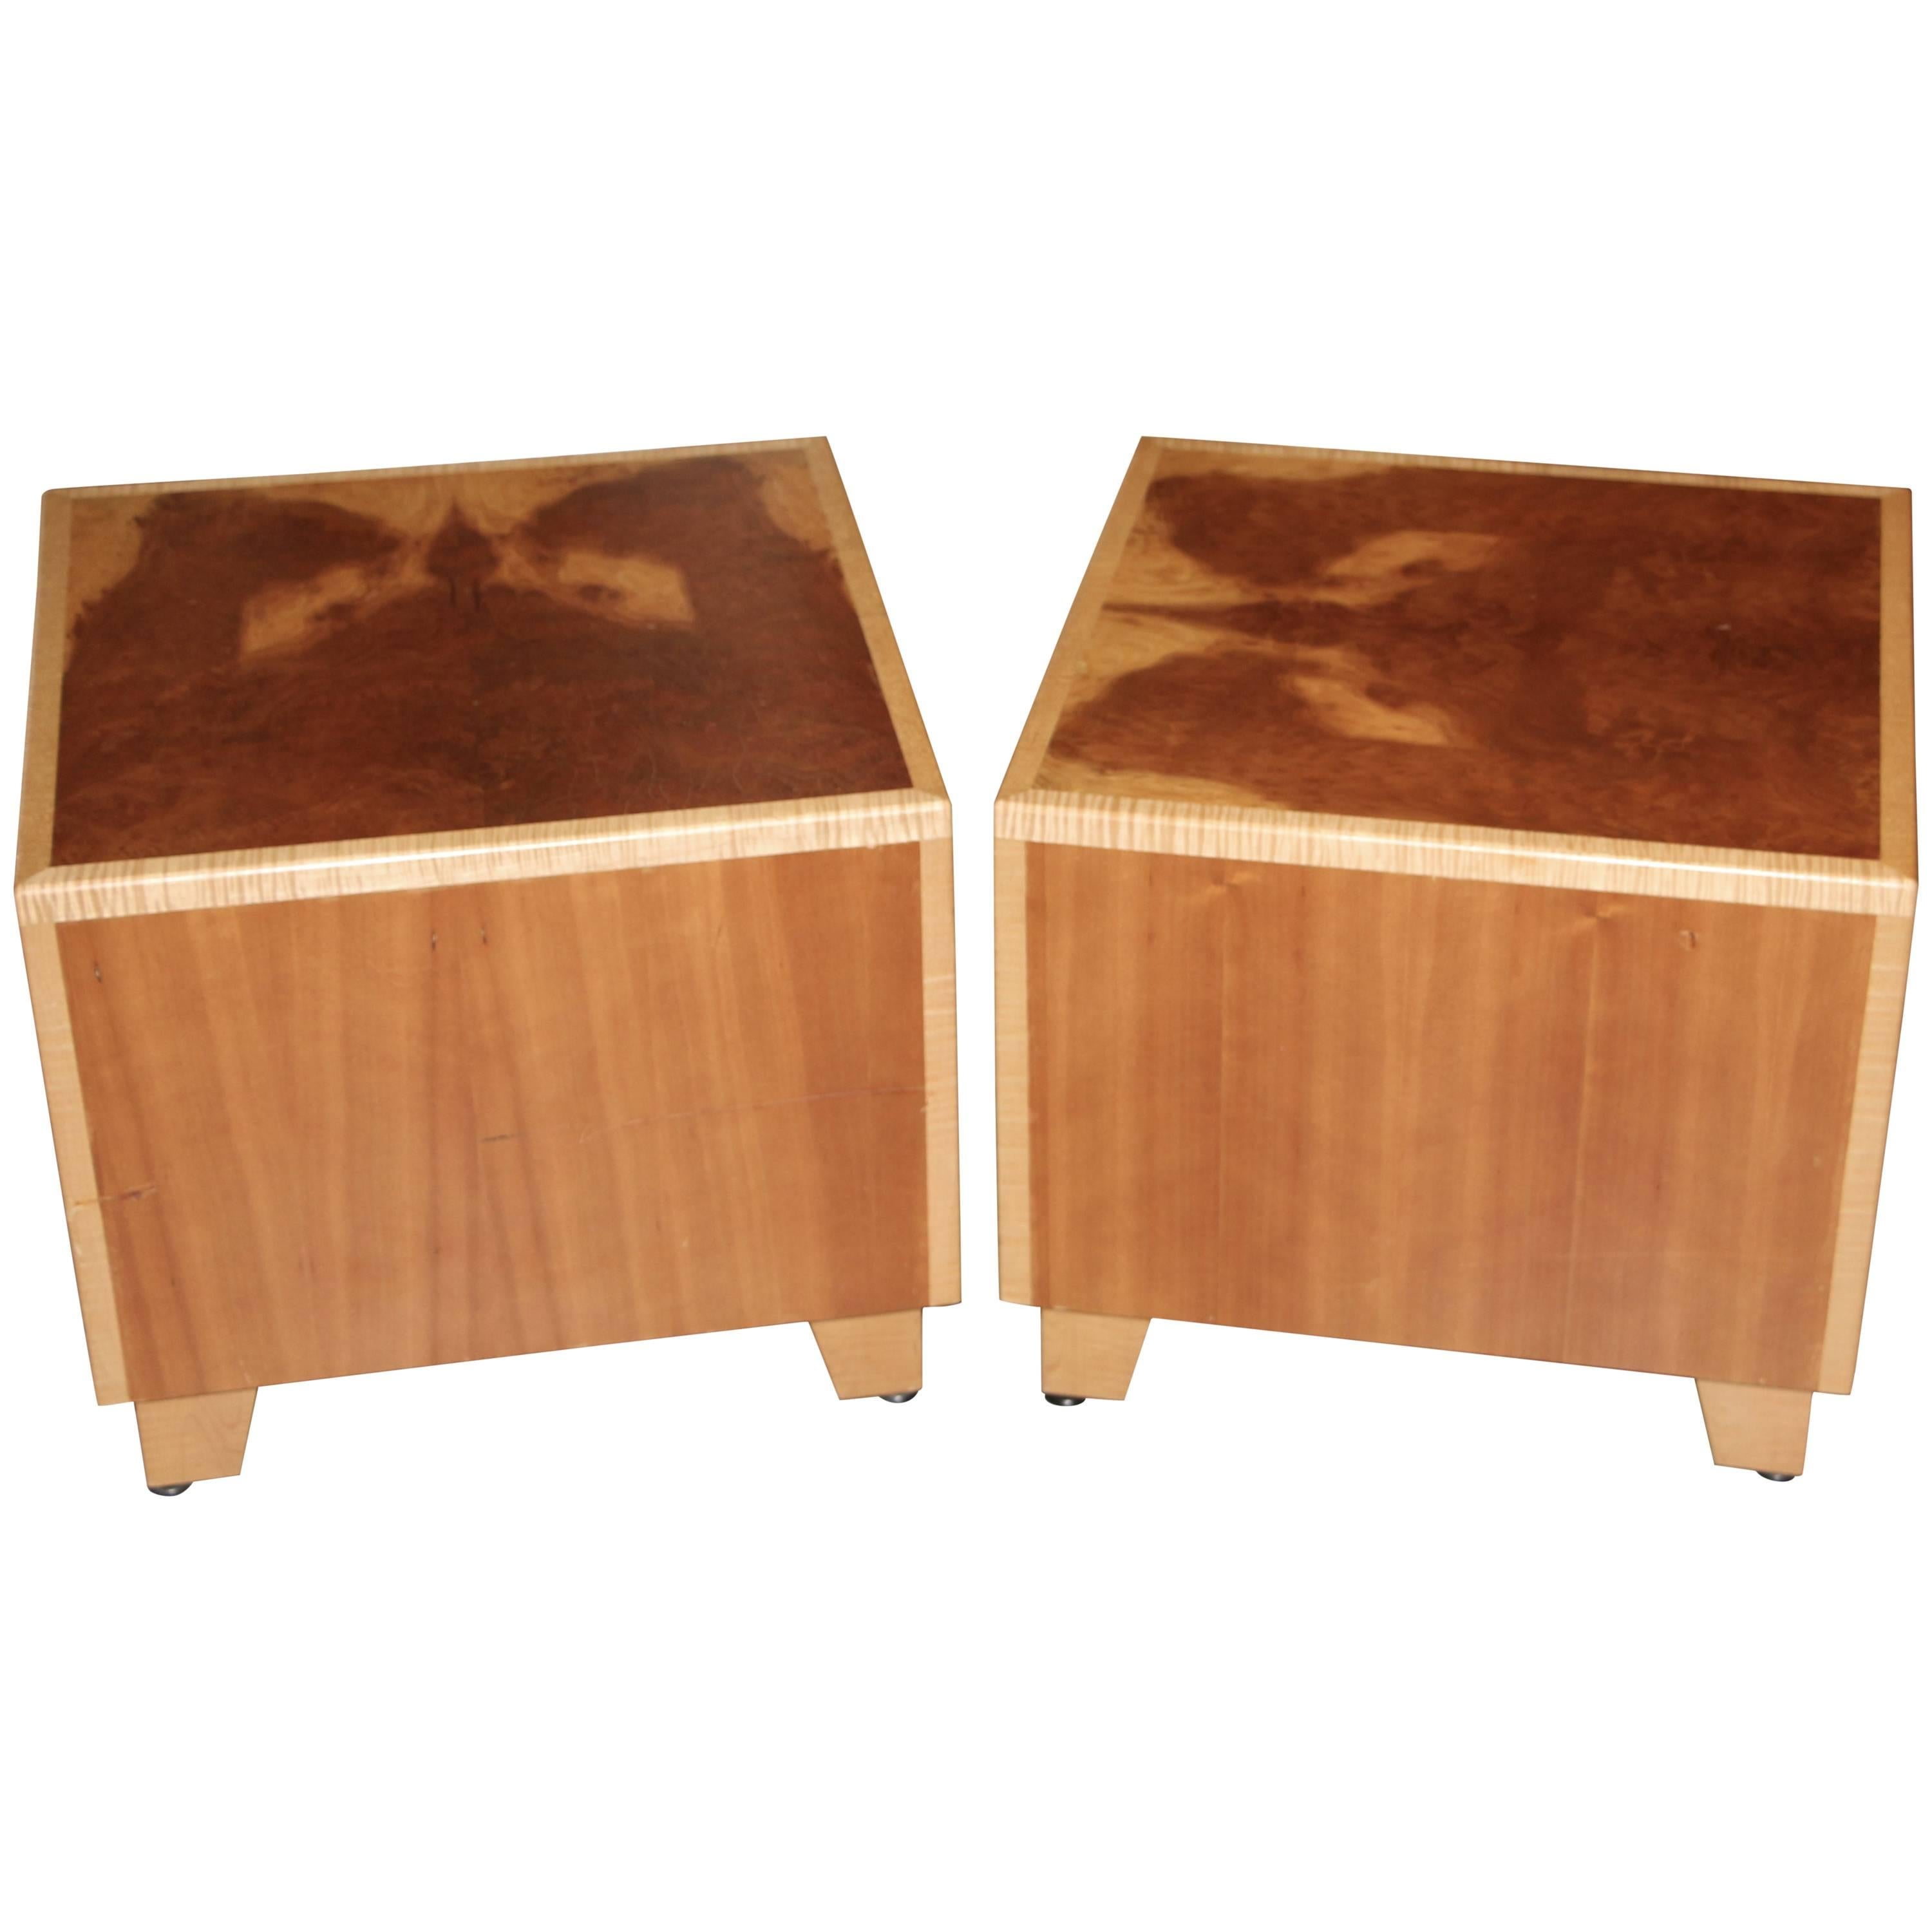 Joseph Kelly Custom Made "Rorshach Bunching Tables" For Sale